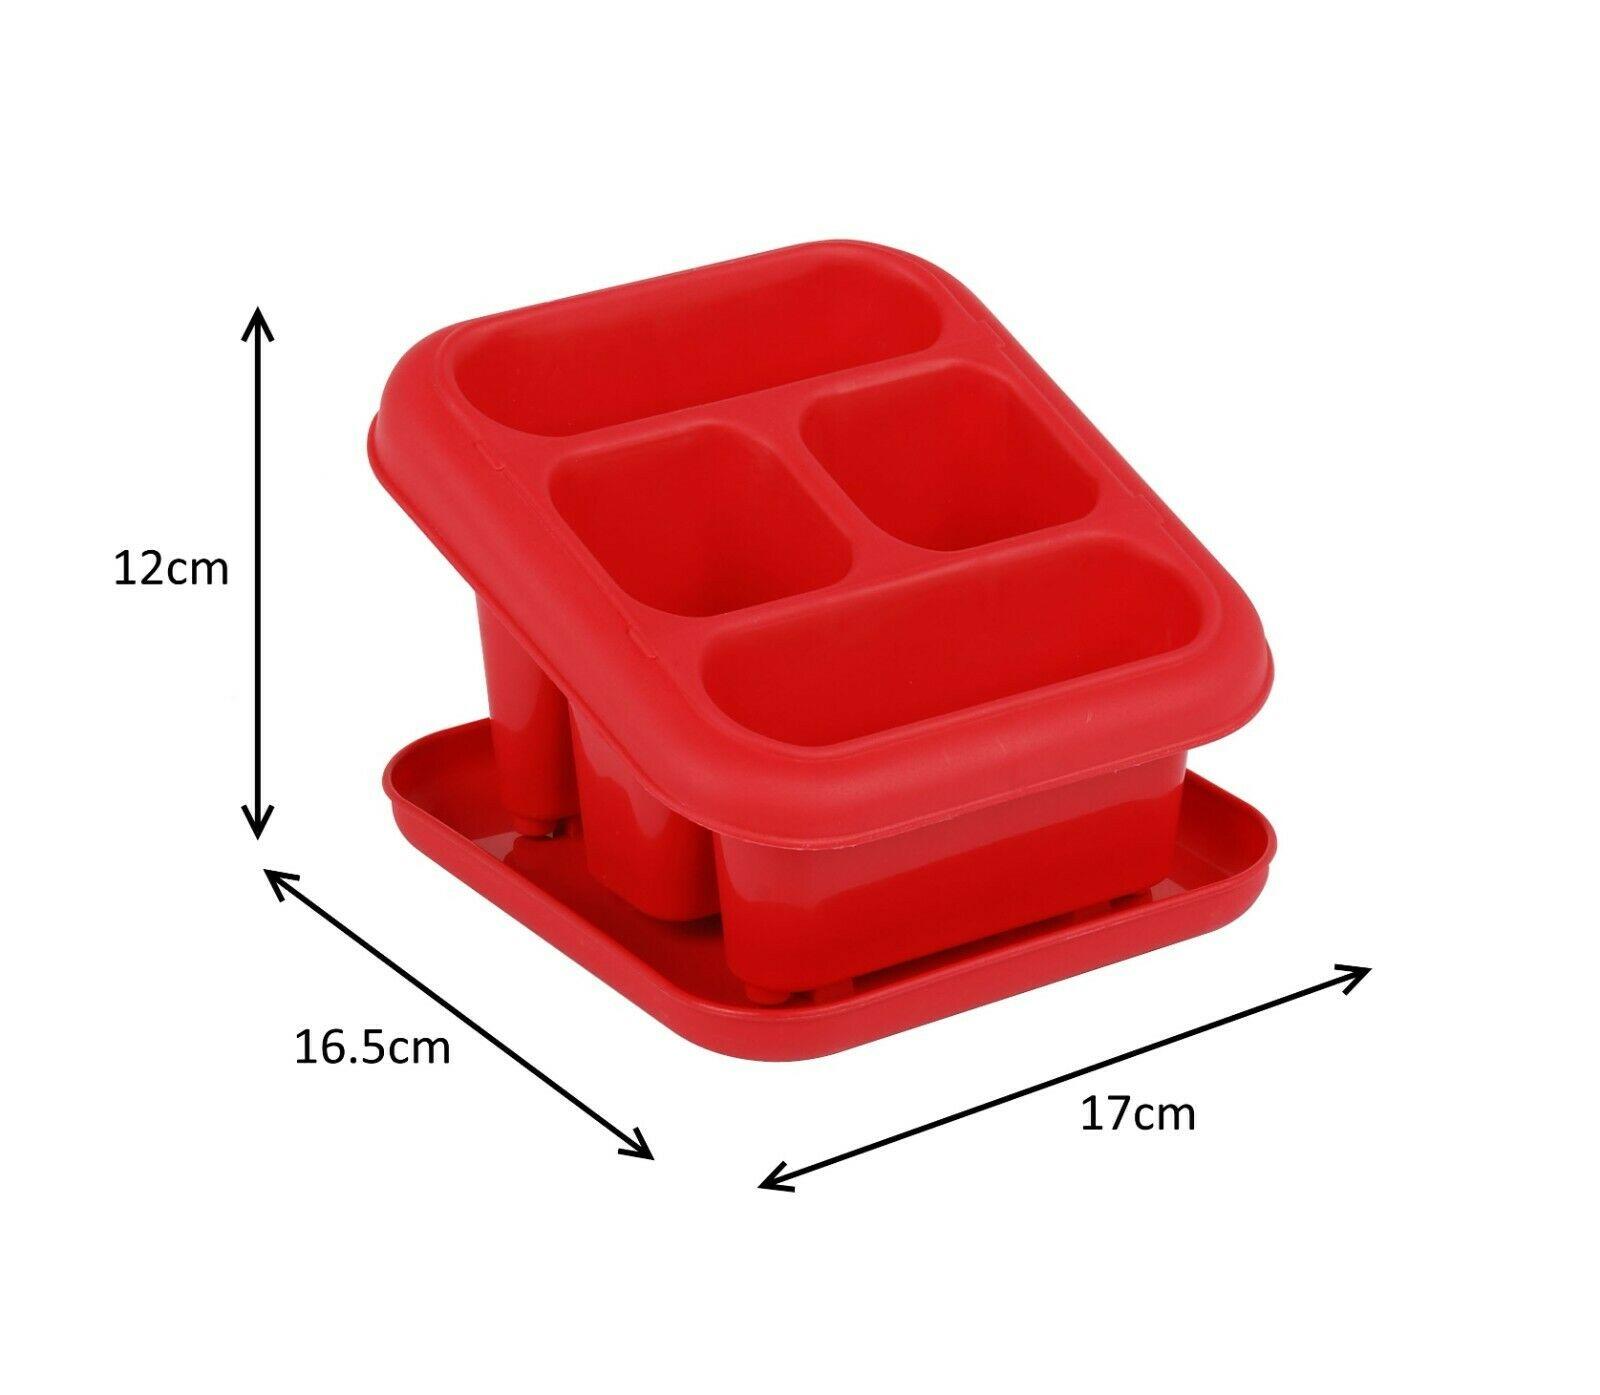 Plastic Sink Tidy Cutlery Drainer 4 Compartment With Drip Tray Utensil Holder